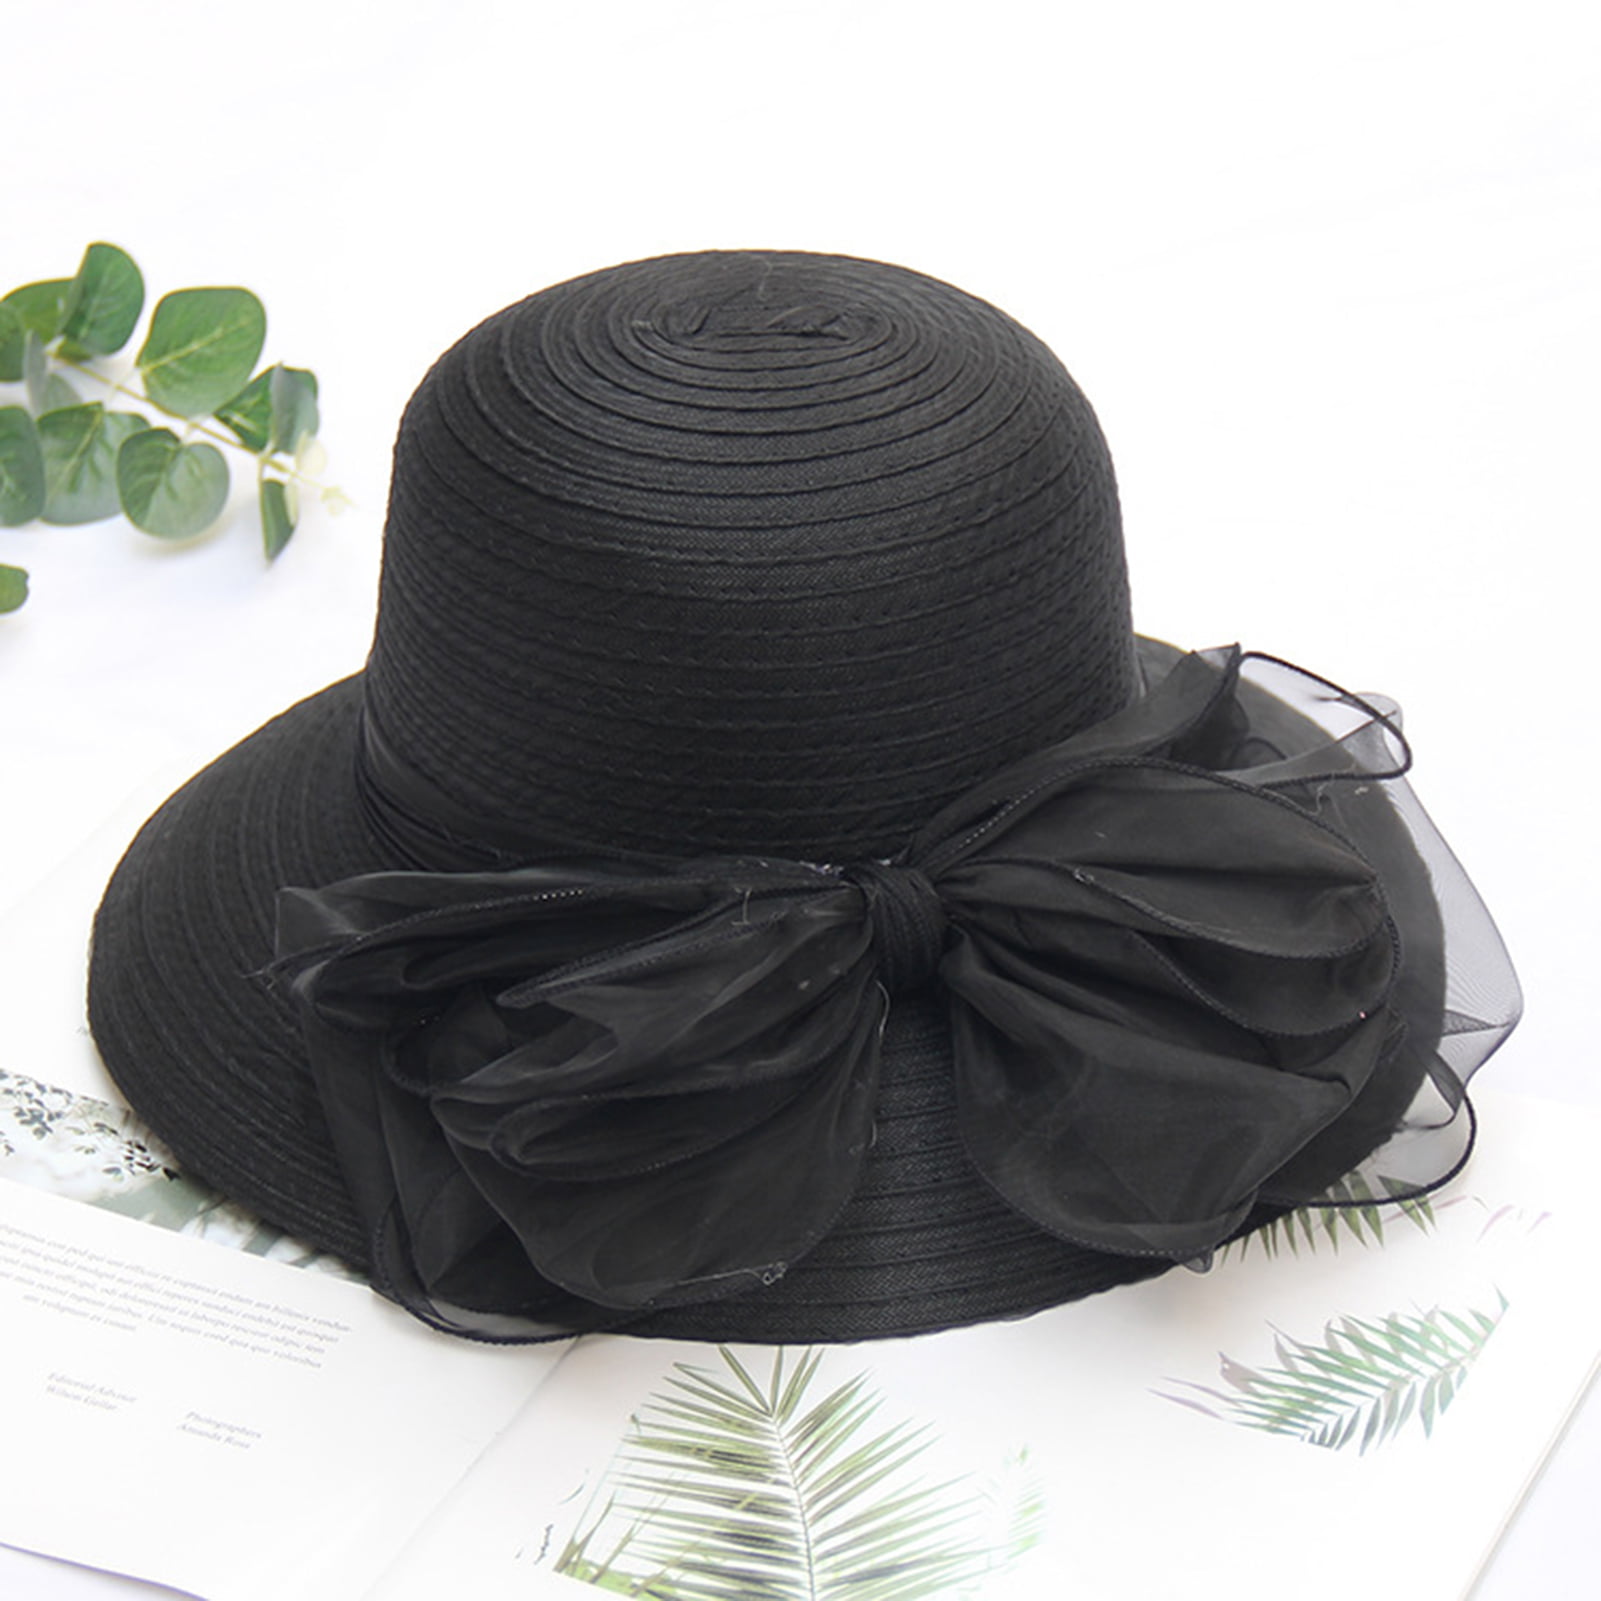 Bucket Hat Party Church Wedding Bow for Cheers.US Bowler Foldable Cloche Derby Hats Tea Dress Wedding Lady